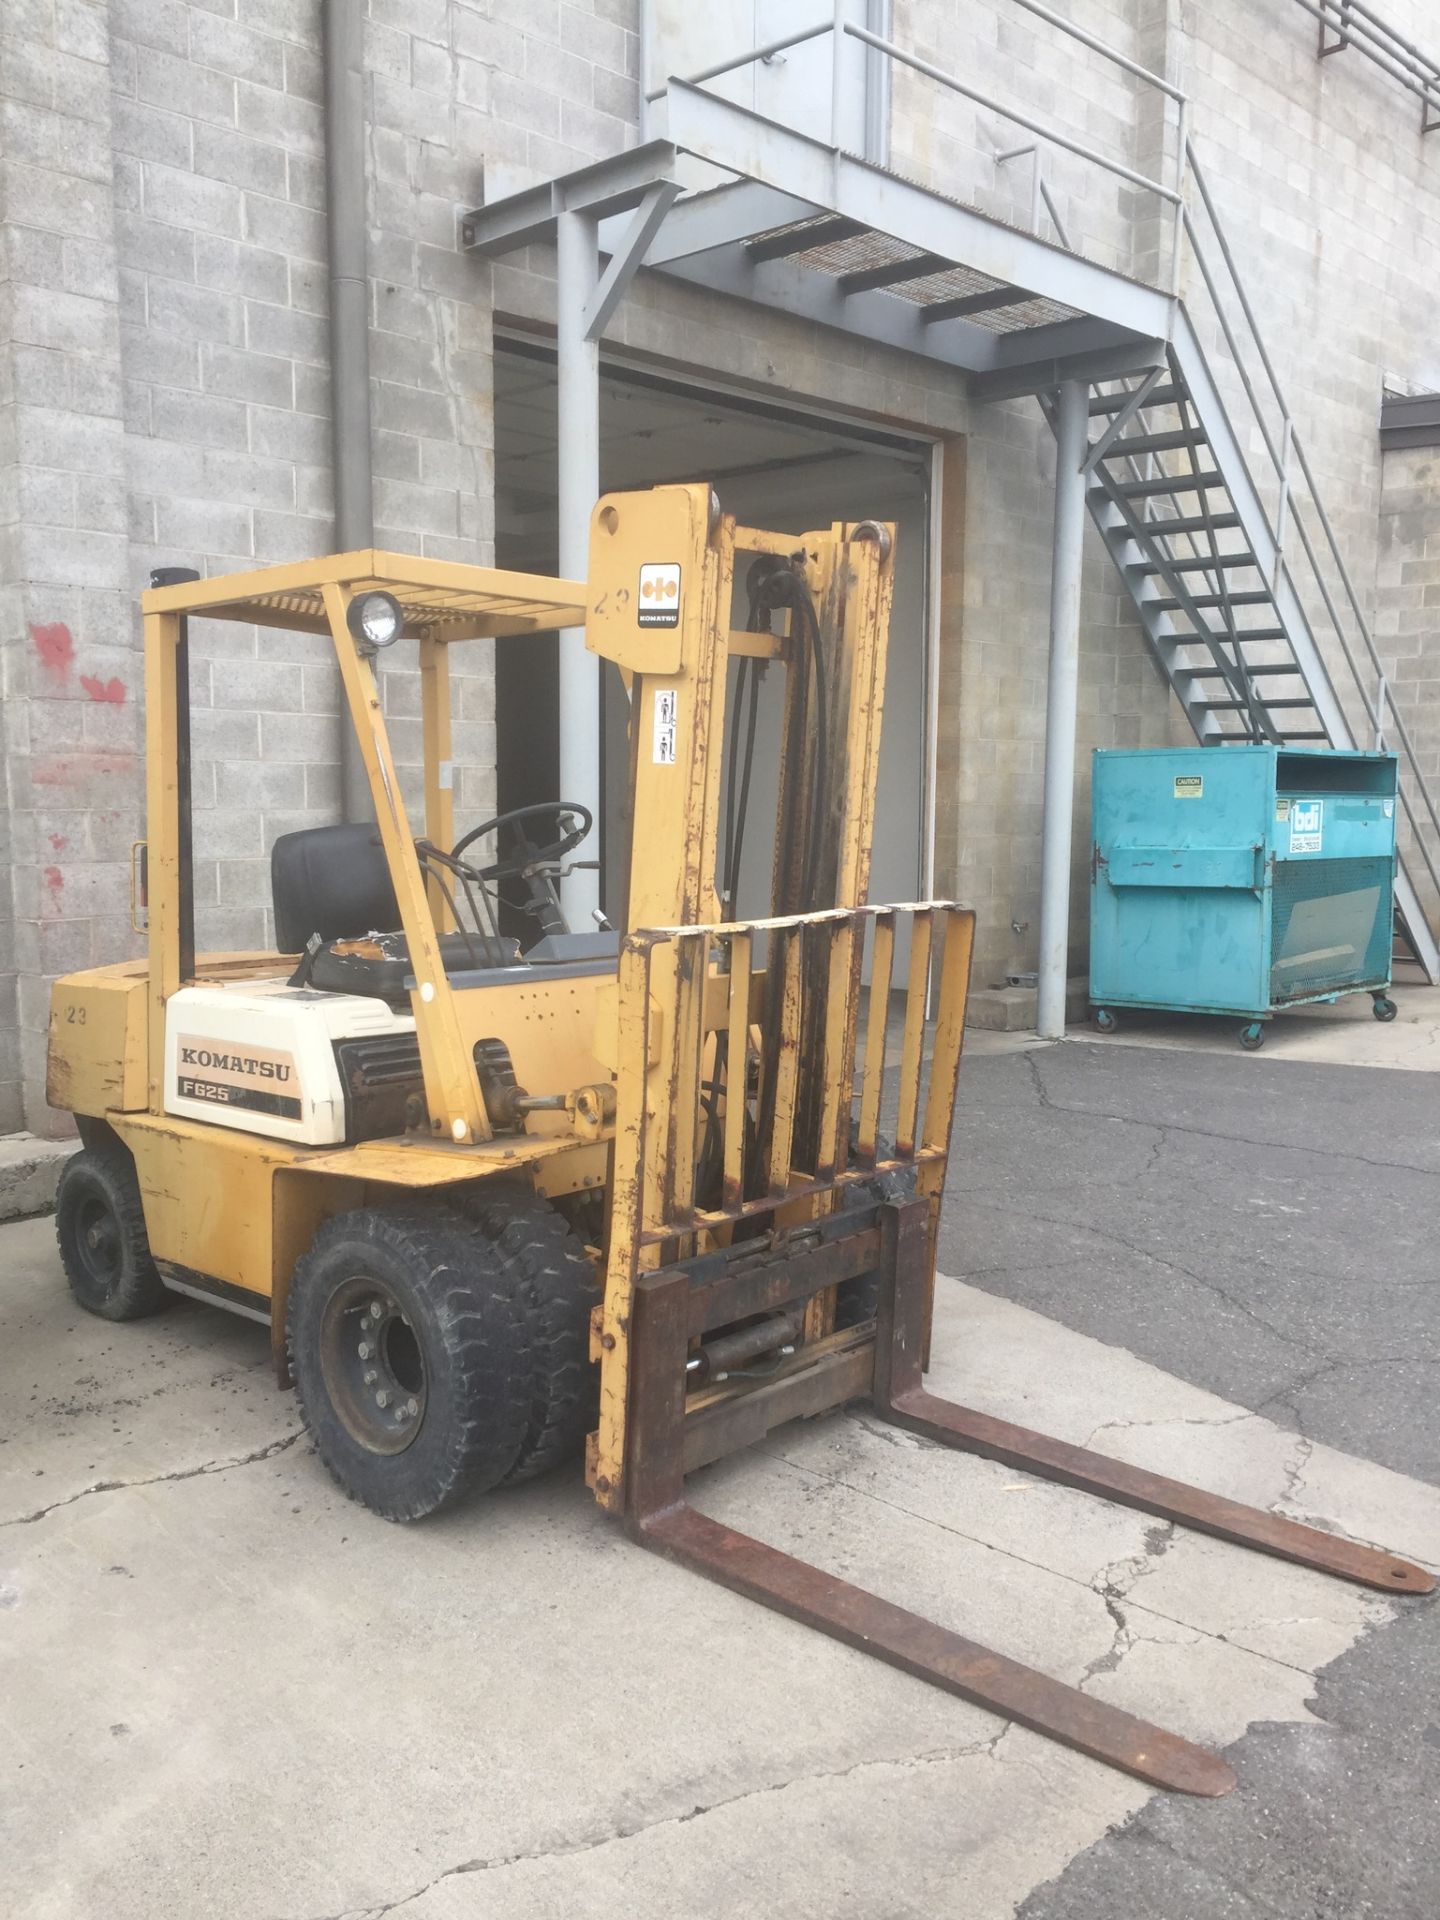 Komatsu 4,690 LB Capacity Gasoline Powered Forklift Model FG 25T-8 : SN 145012A, with Side Shift and